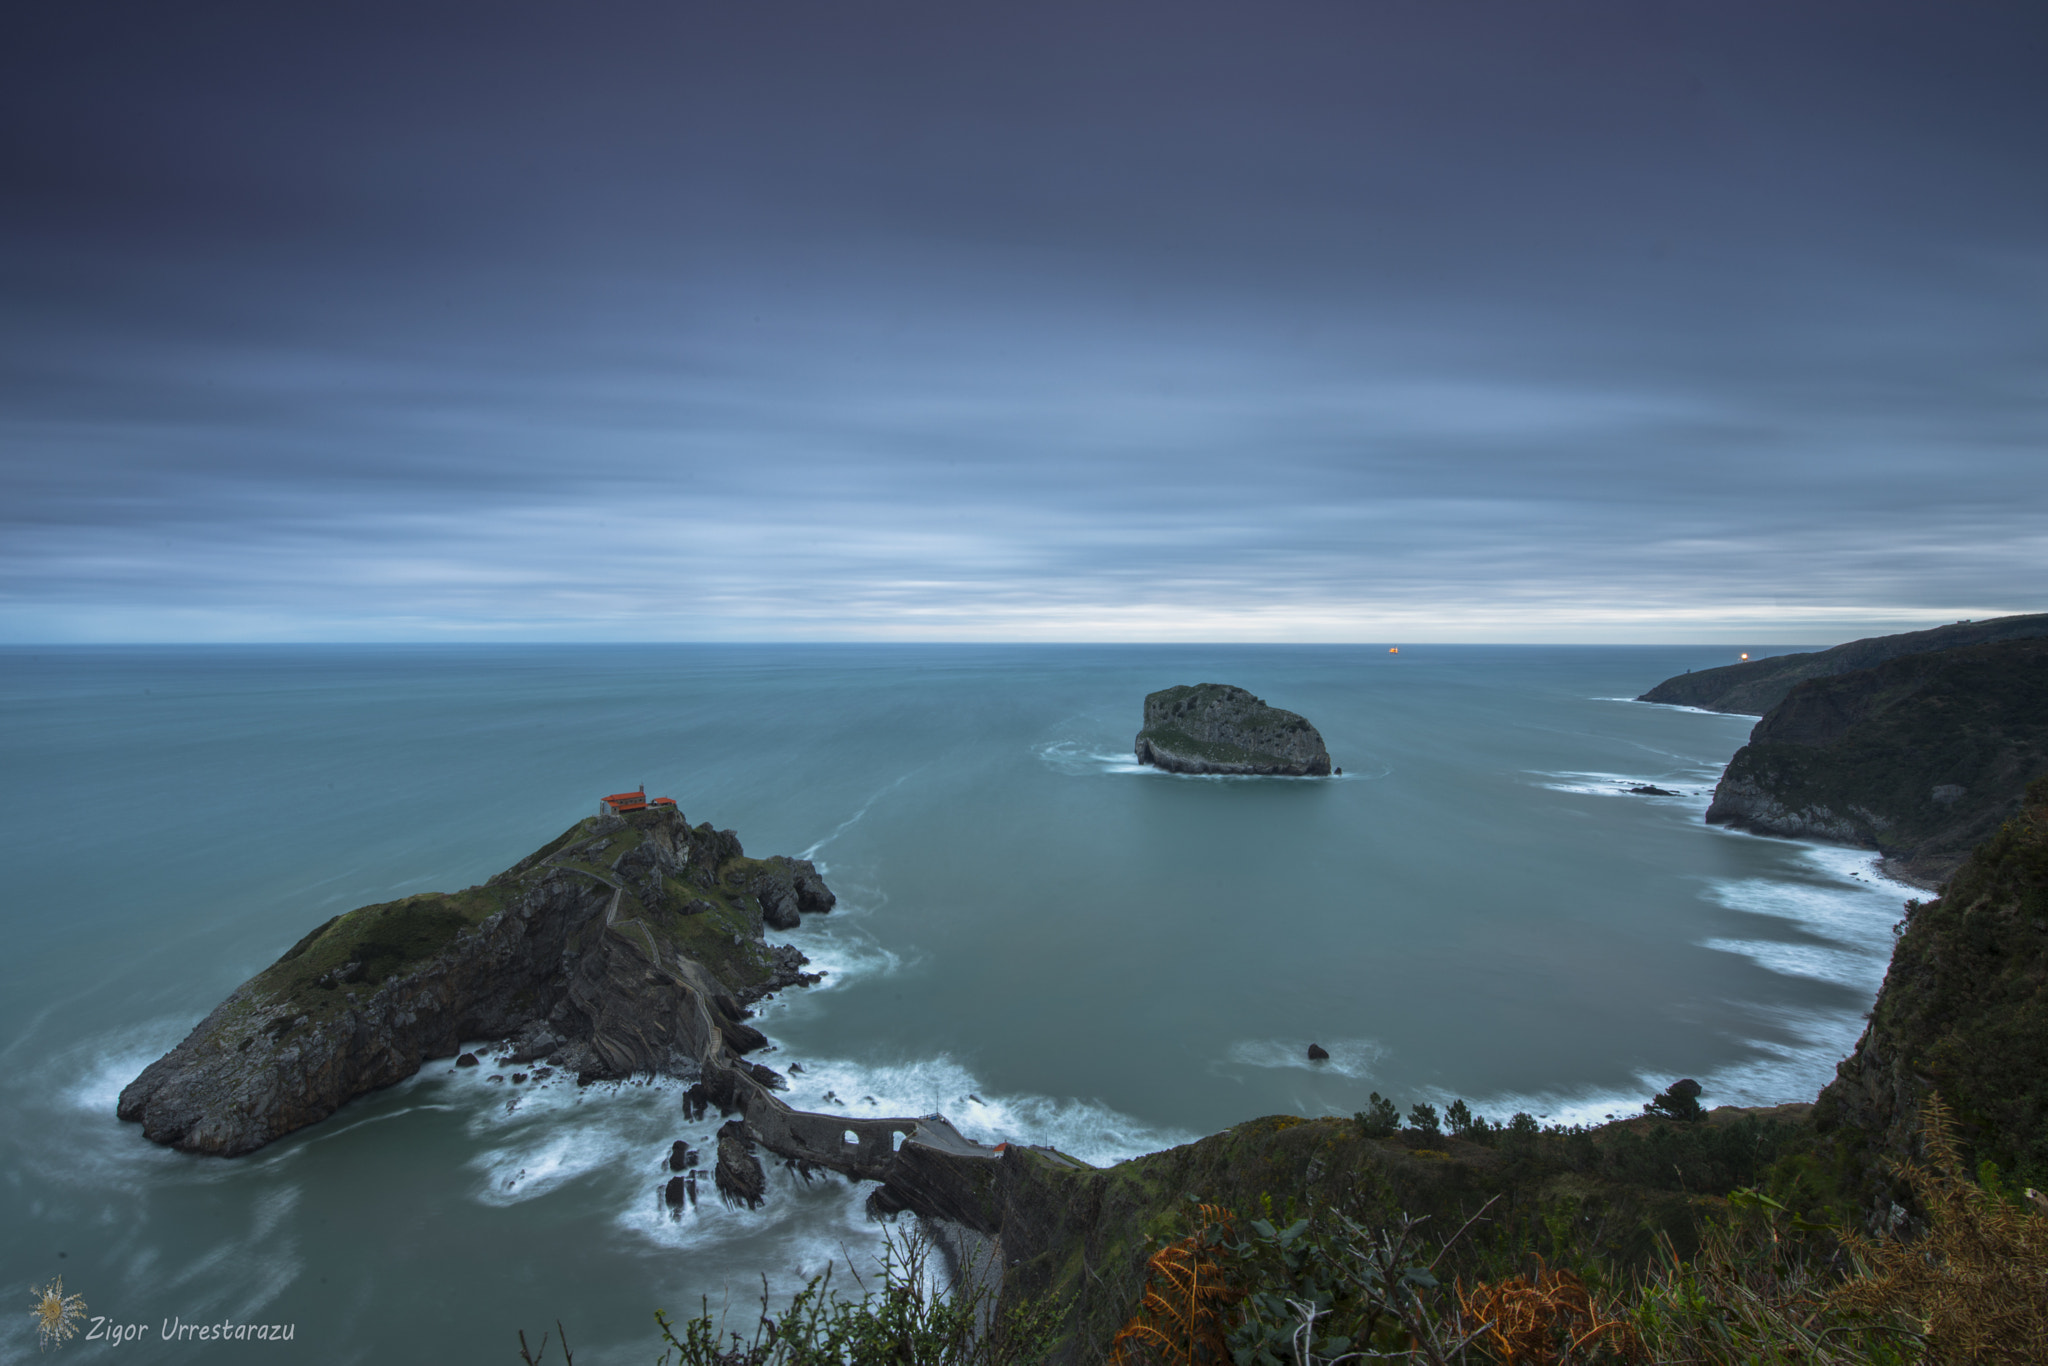 Nikon D800 sample photo. In memory of the basque sailors drowned in these waters, 80 years ago. photography